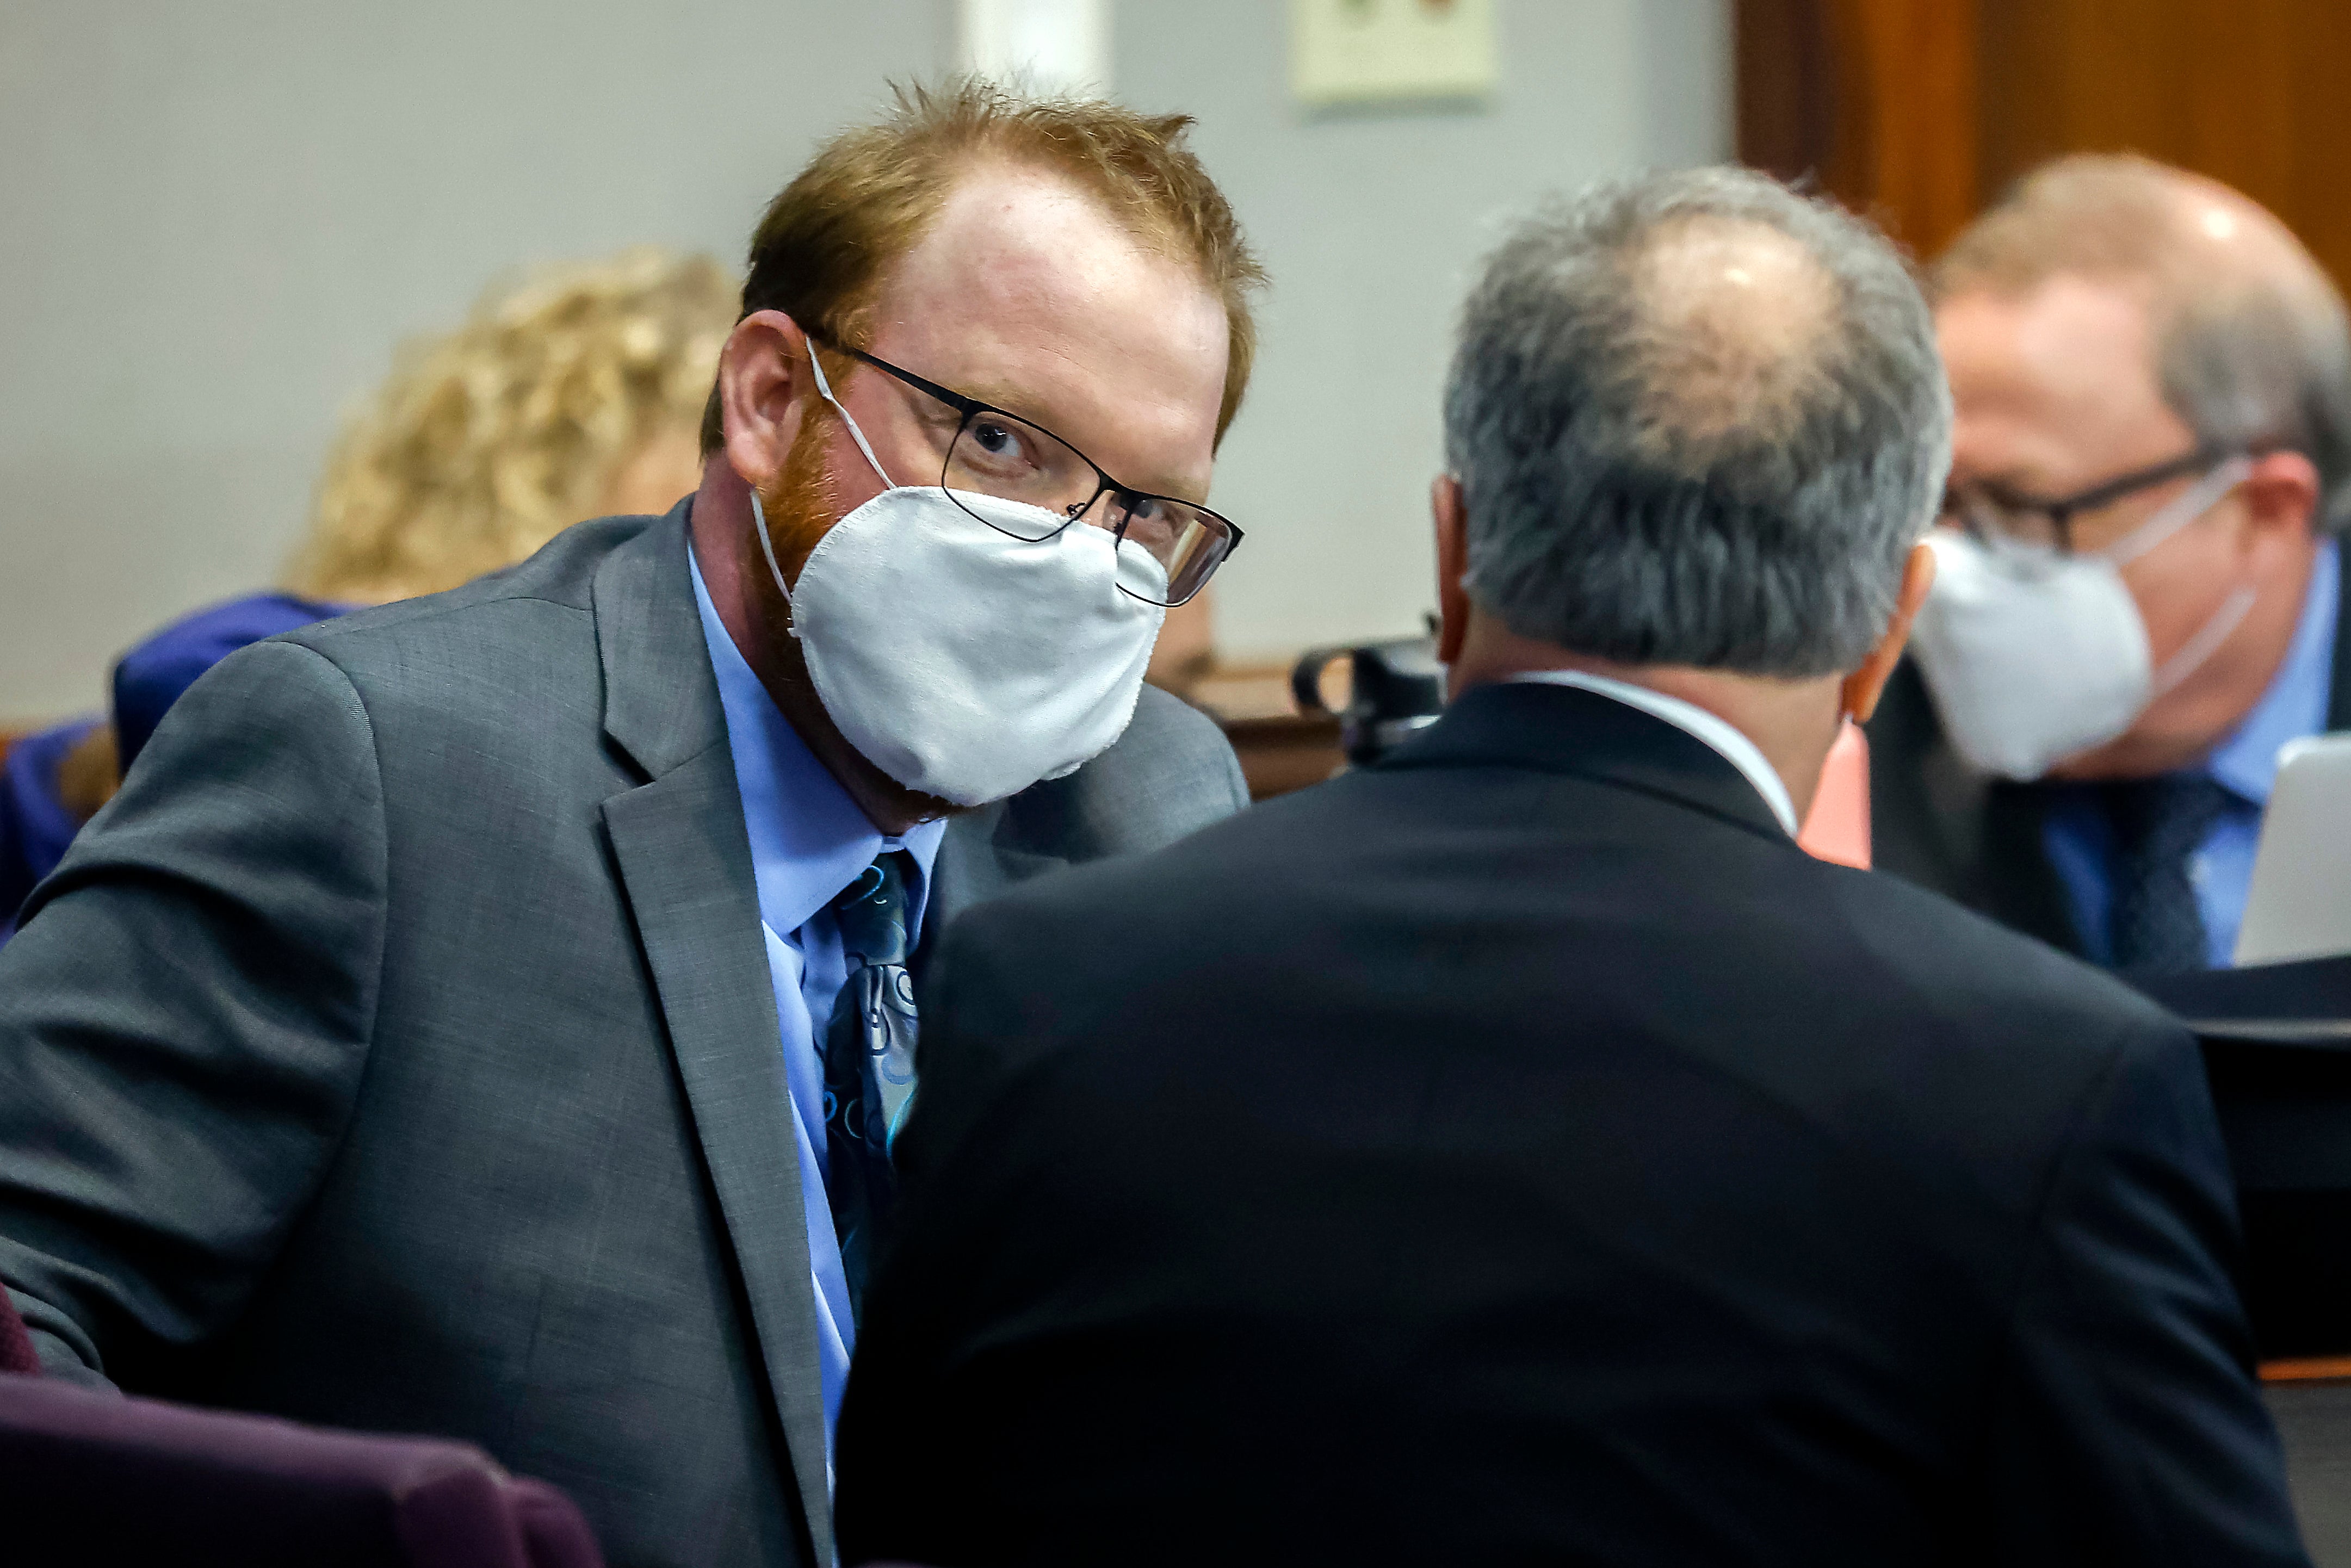 Travis McMichael is seen in court at his sentencing on 7 January 2022